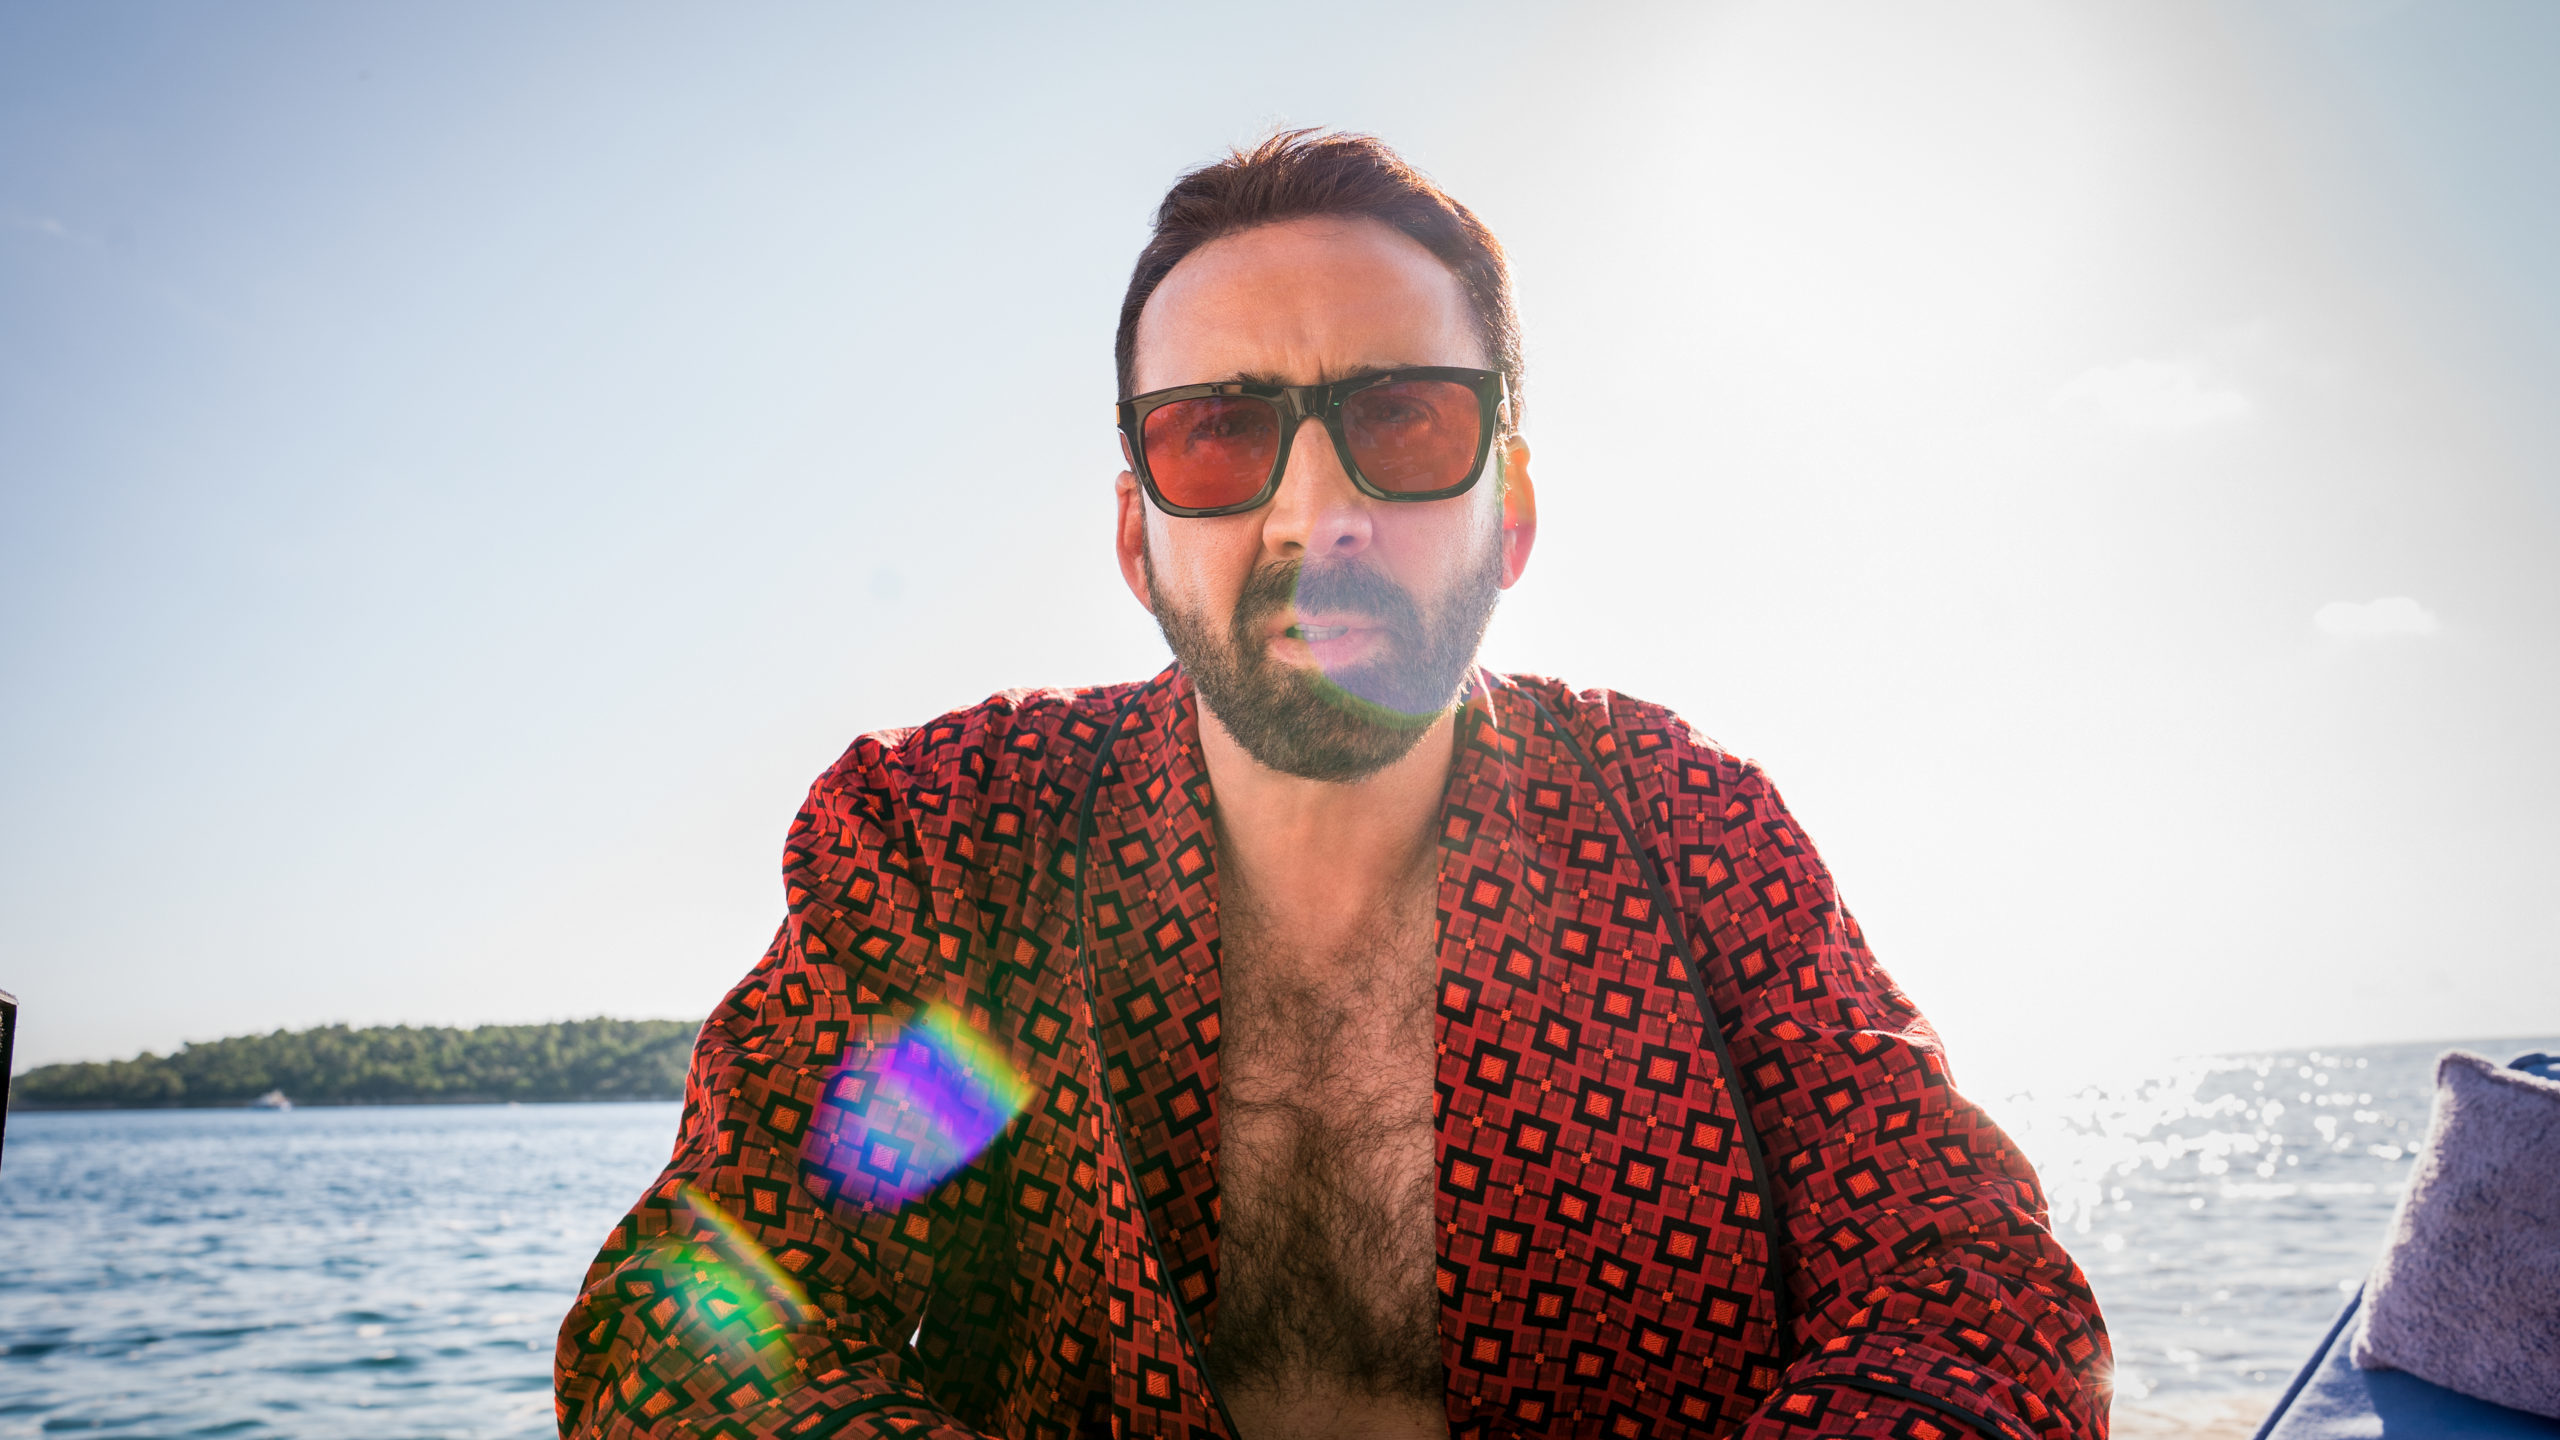 Nicolas Cage as “Nick Cage” contemplates his career in Mallorca, Spain in “The Unbearable Wei...